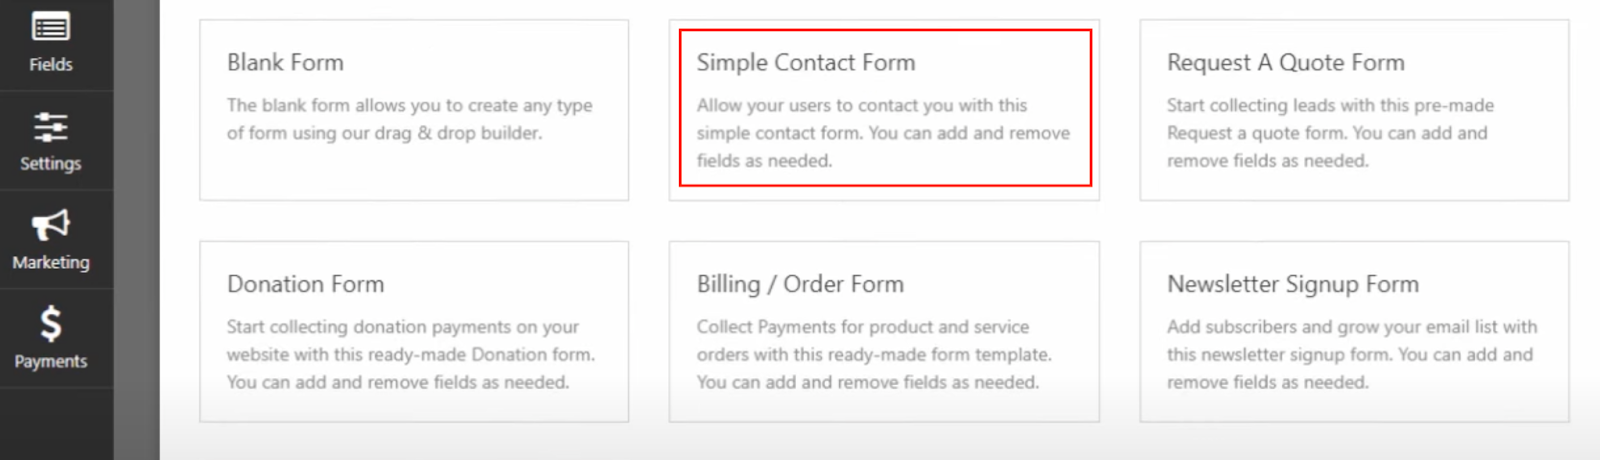 WPForms Simple Contact Form template